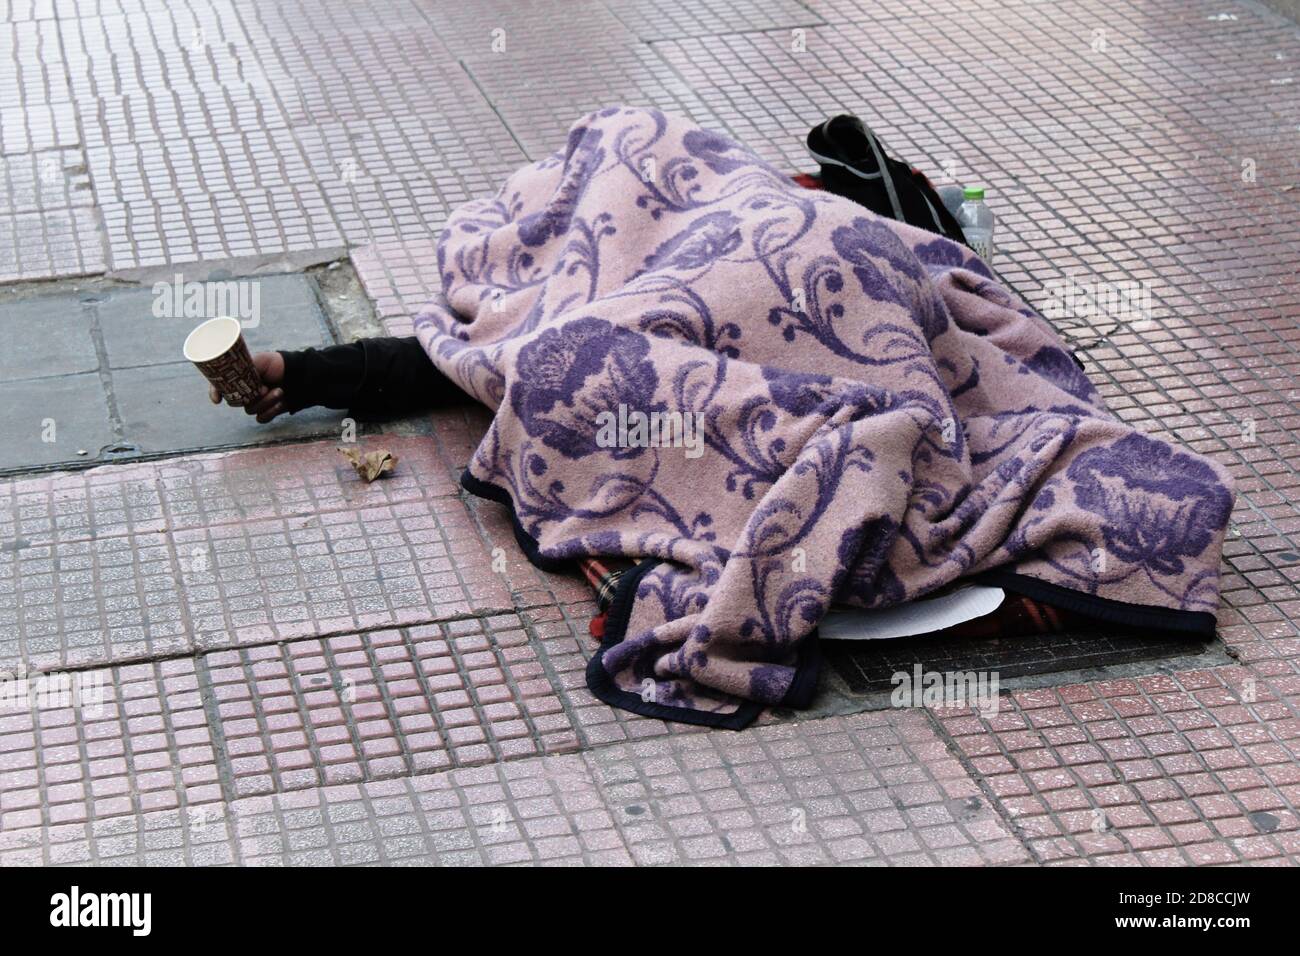 Greece, Athens, February 1 2020 - An unidentified homeless person begging for money in the center of Athens. Stock Photo